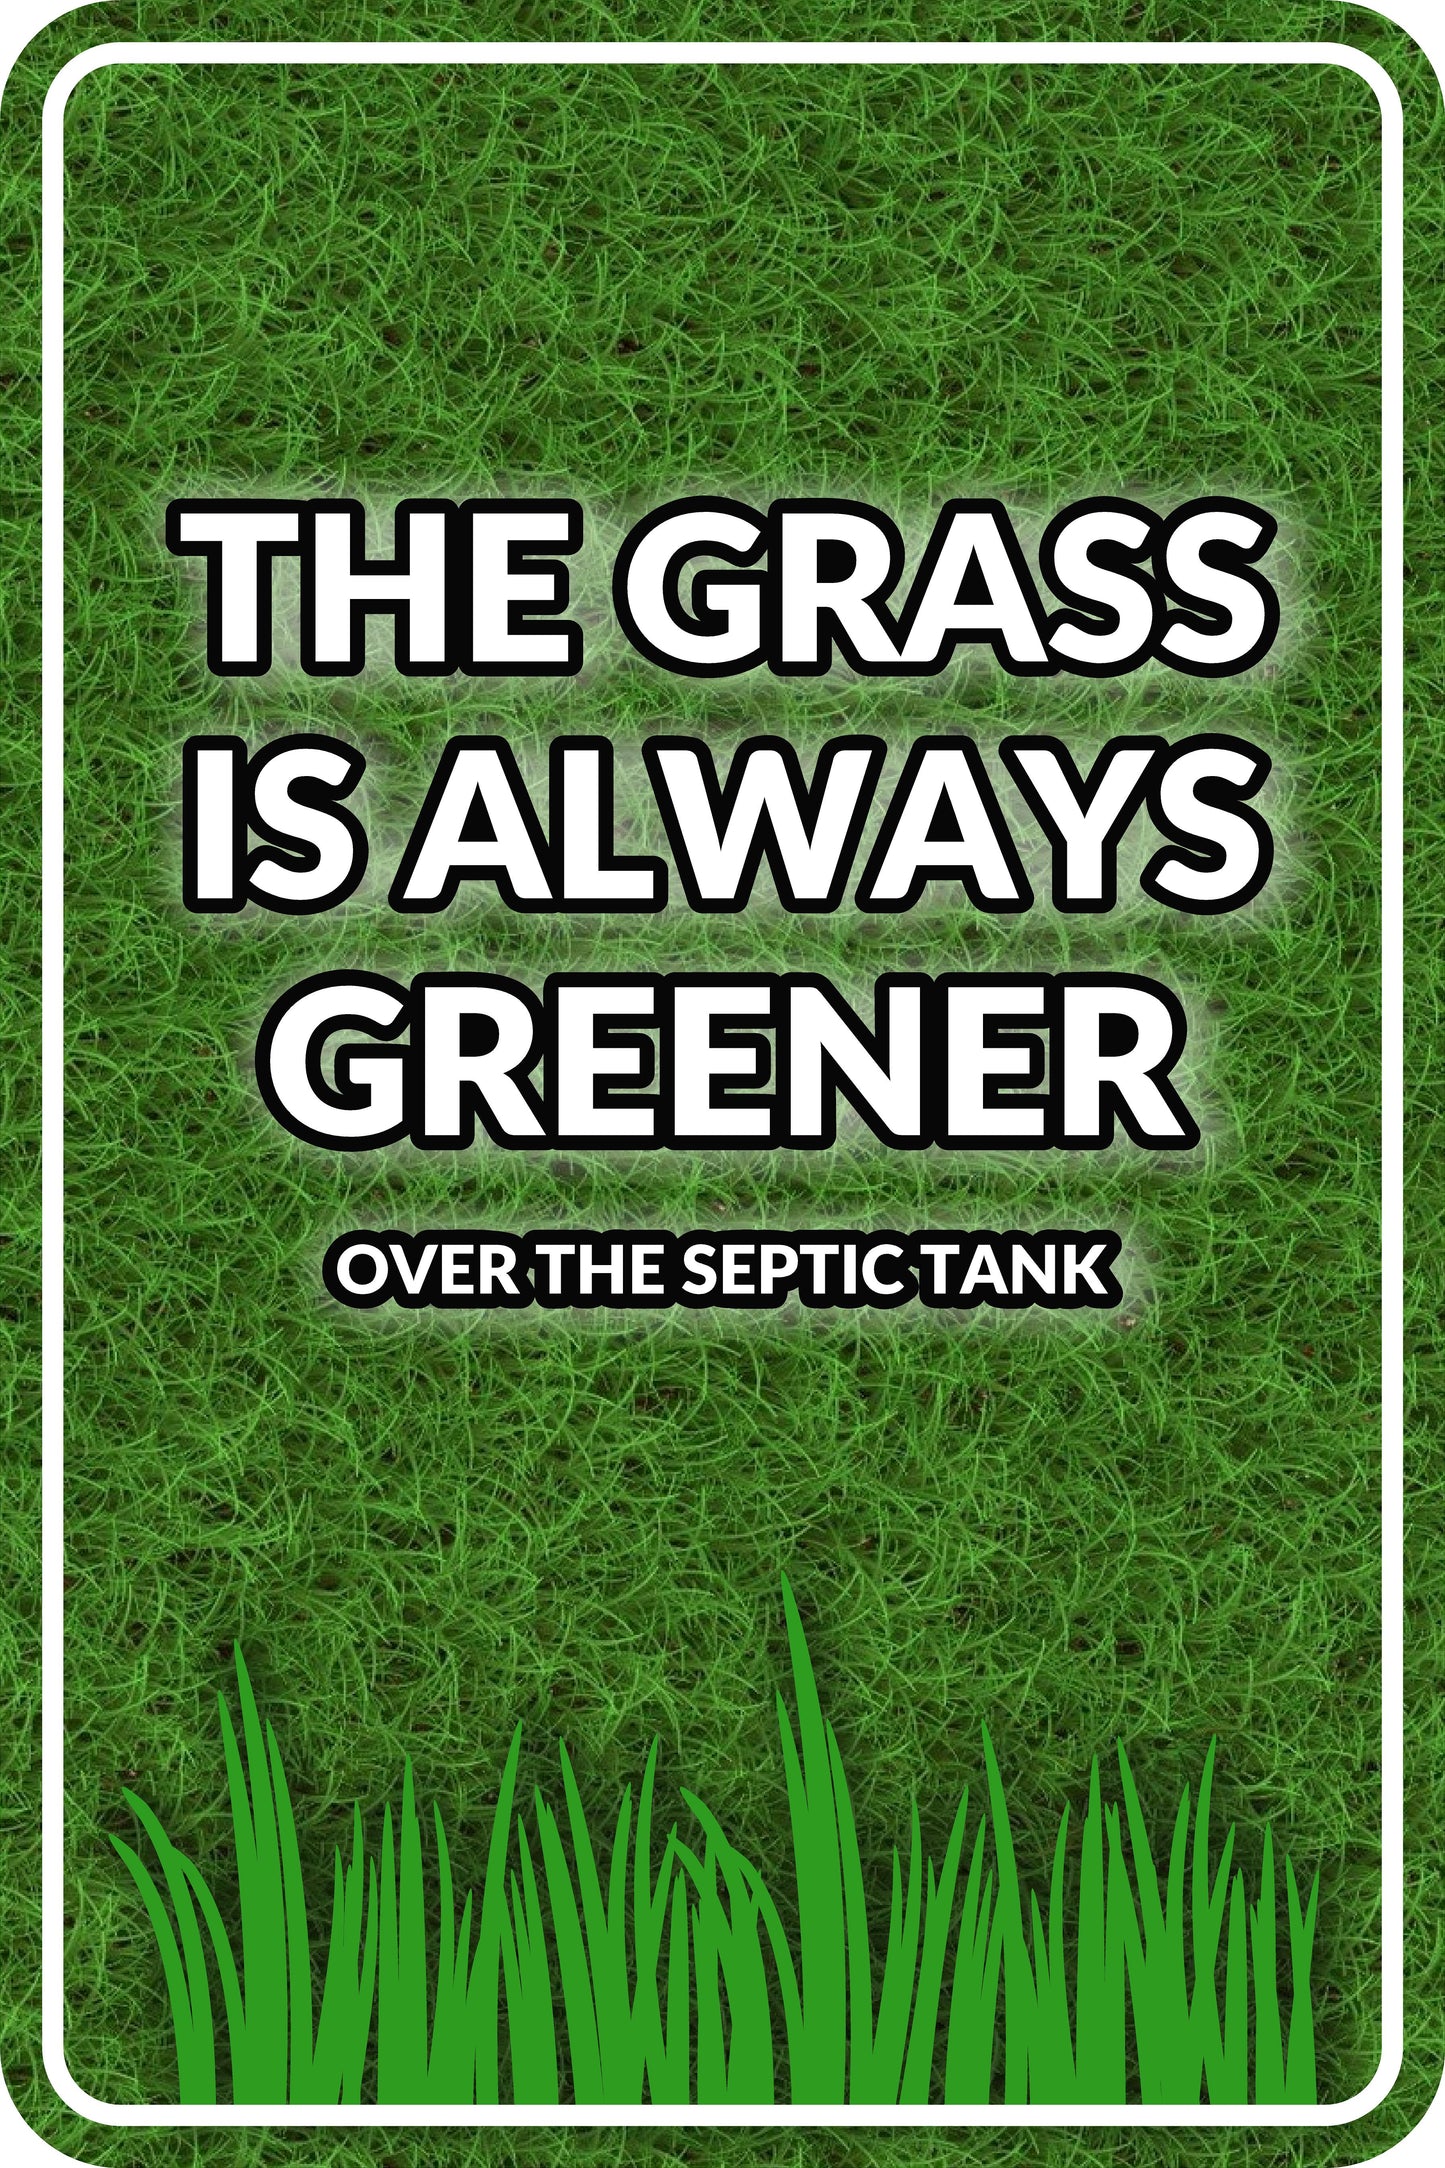 GRASS IS GREENER - Sign